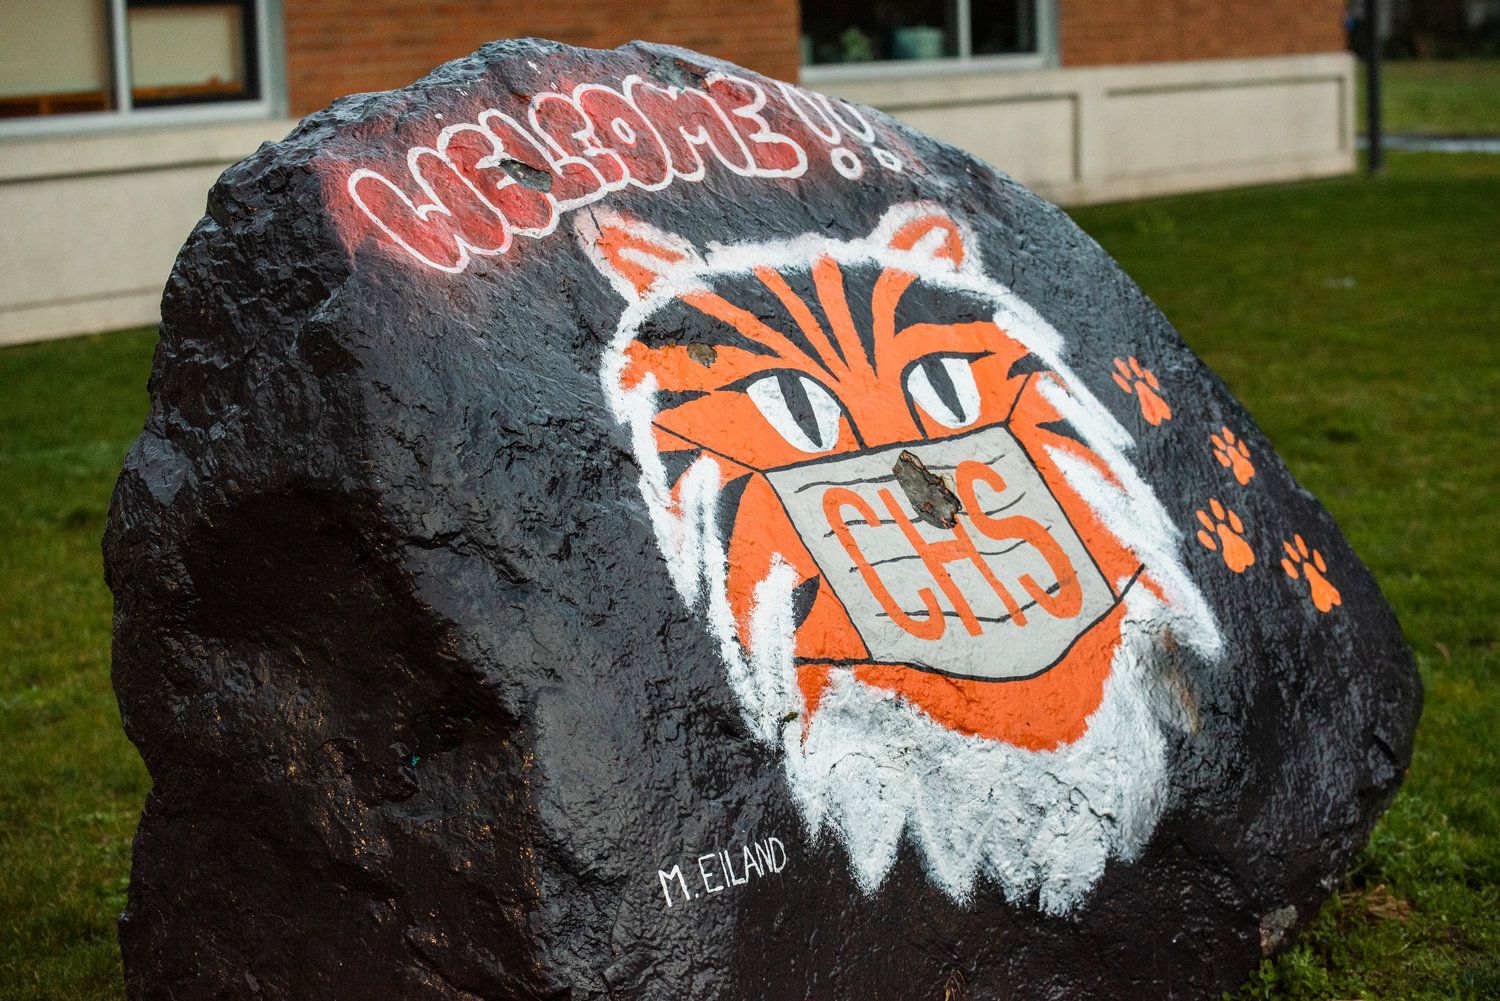 A rock on display outside Centralia High School features a tiger, the school mascot, wearing a mask.